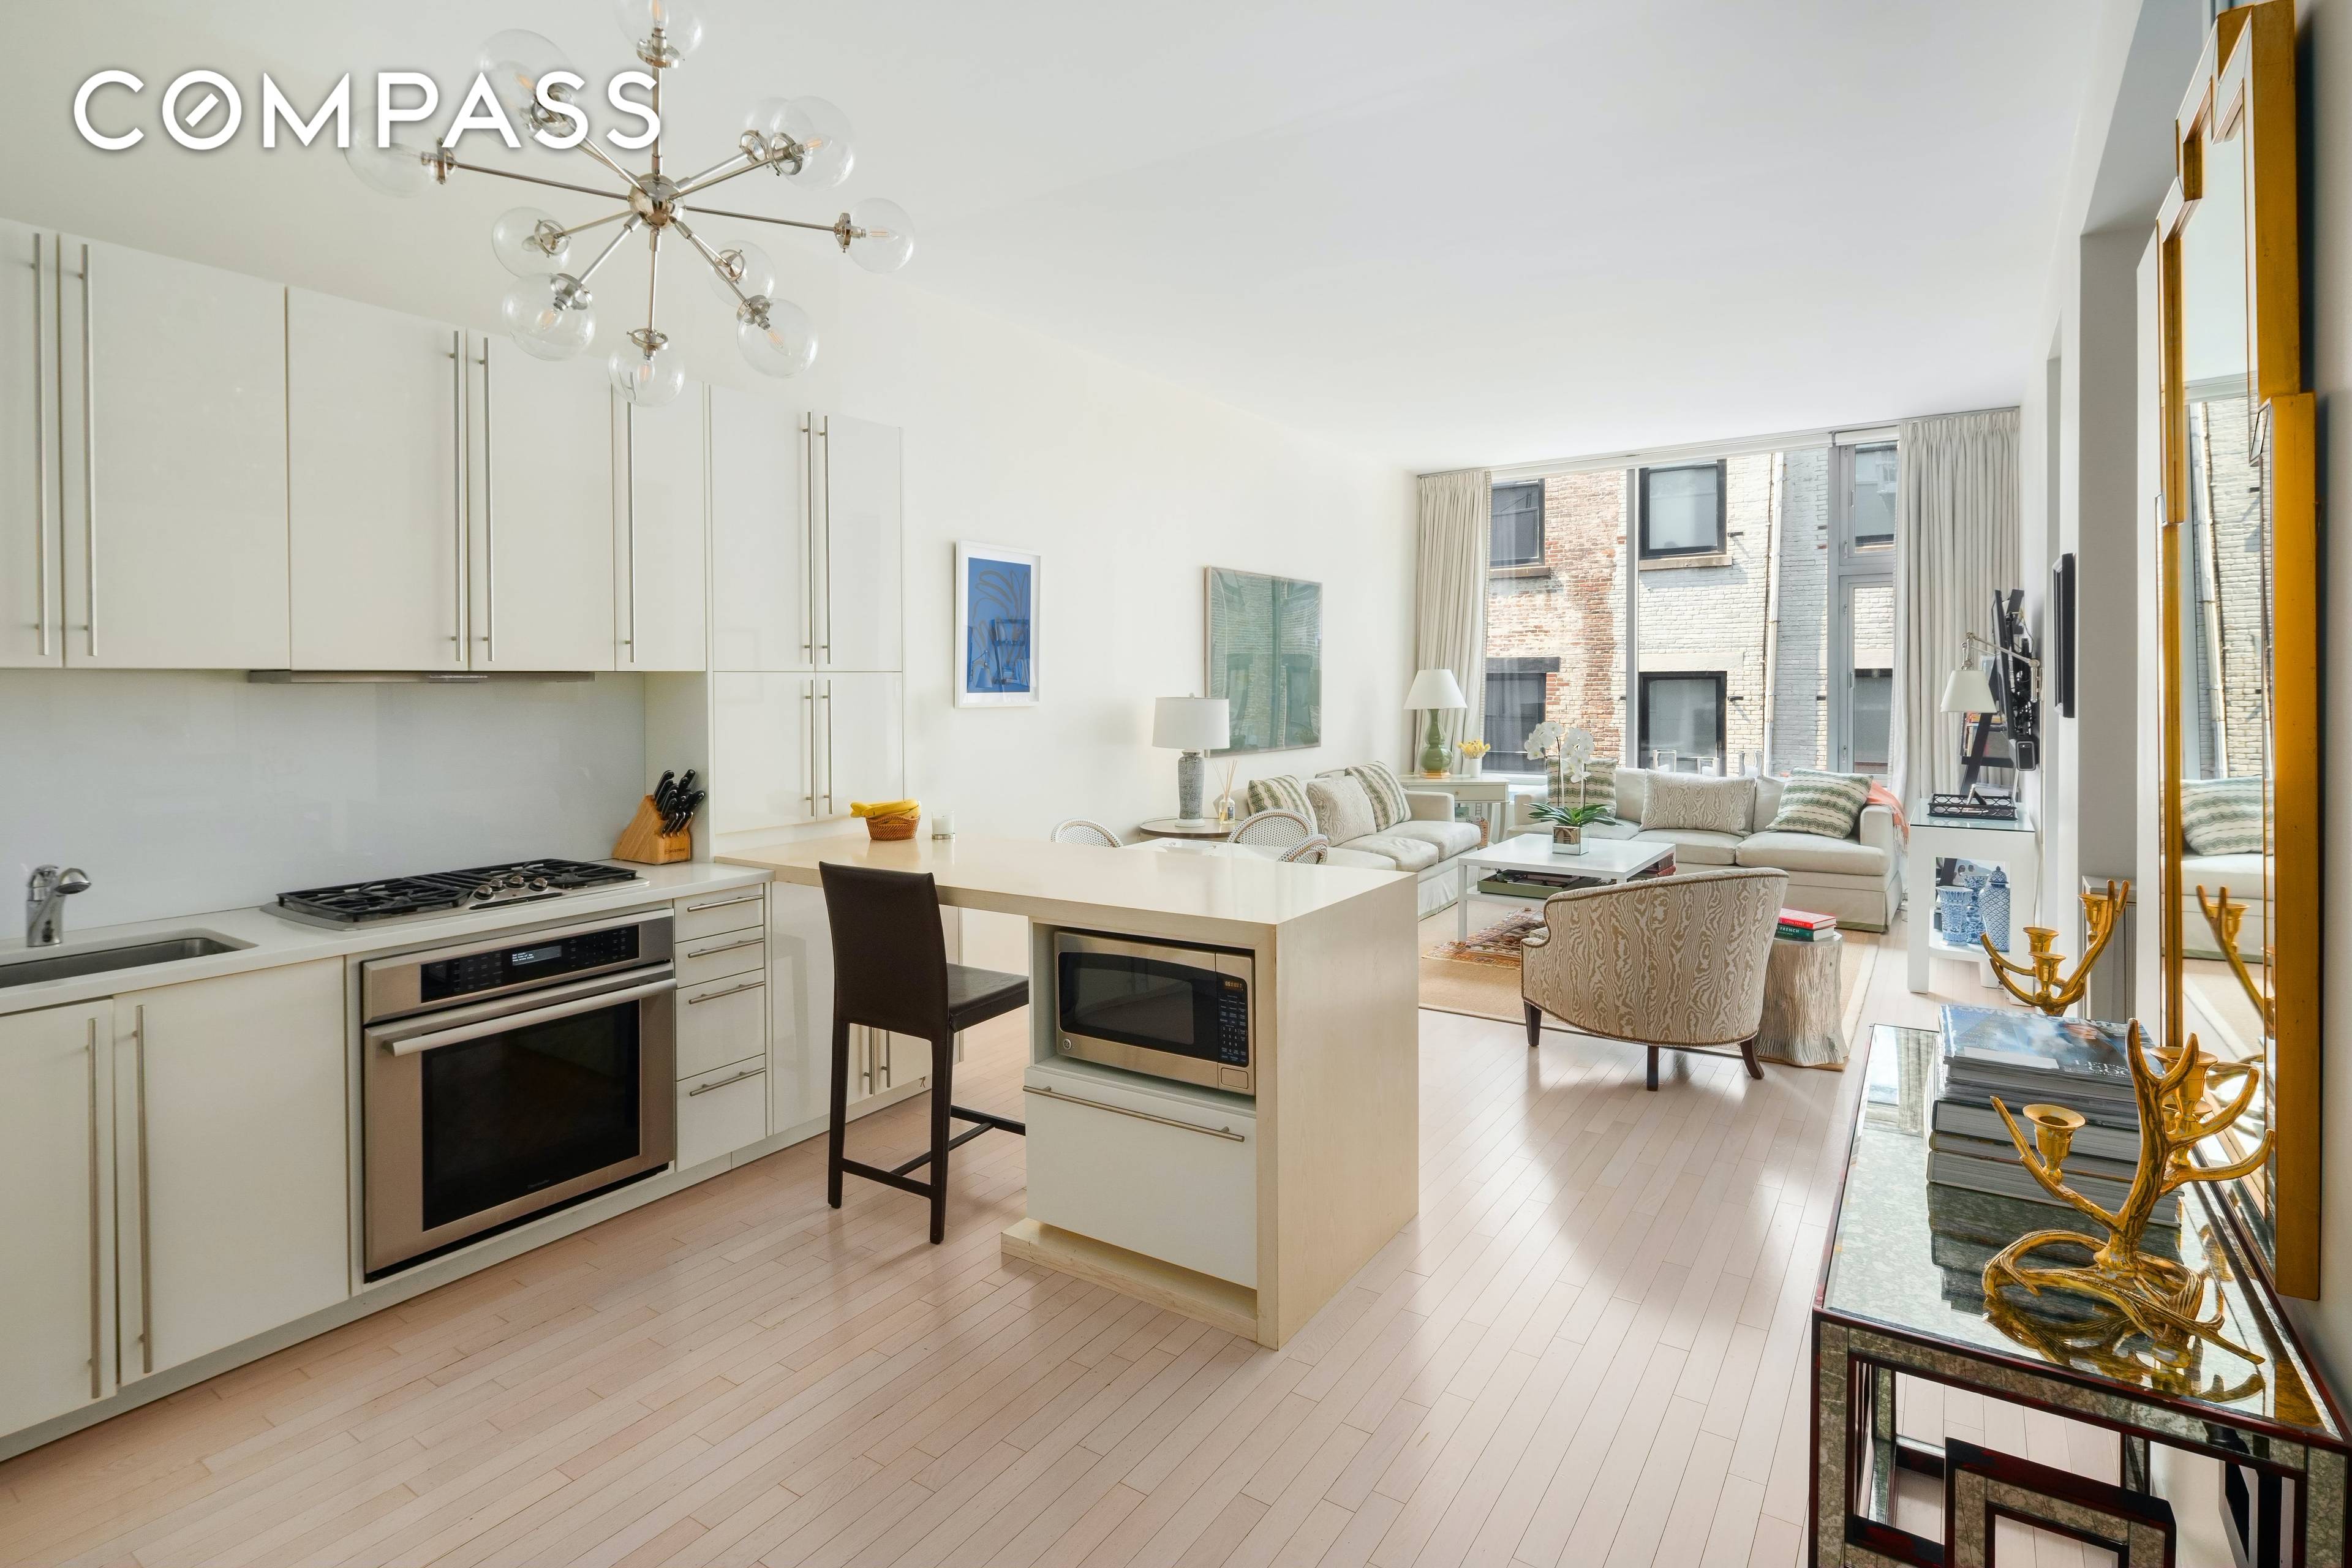 TOTAL SQFT 1, 230 INTERIOR 1, 189 SF STORAGE 41 SF Situated in one of the most desirable landmarked buildings on Ladies Mile, this beautiful and bright 2 bed, 2 ...